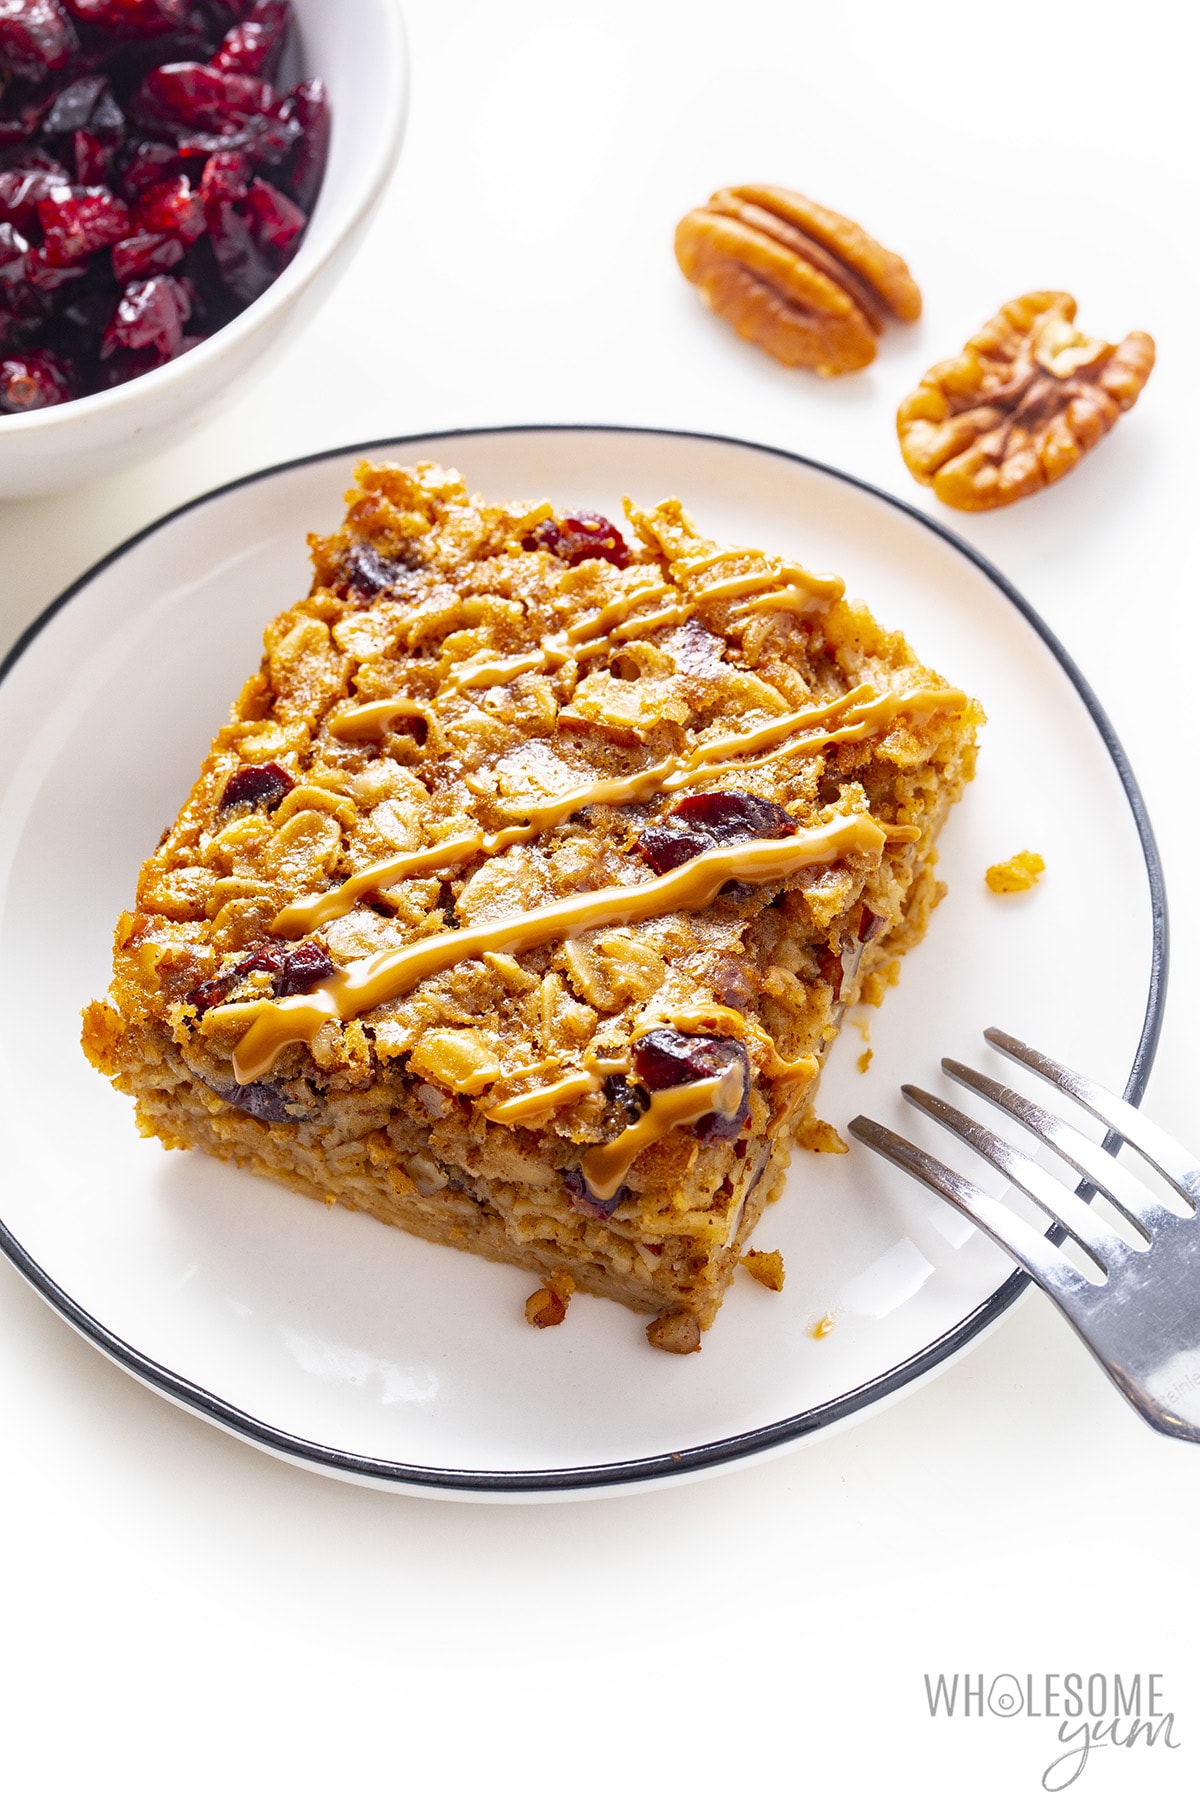 Baked oatmeal square on a plate with a fork.